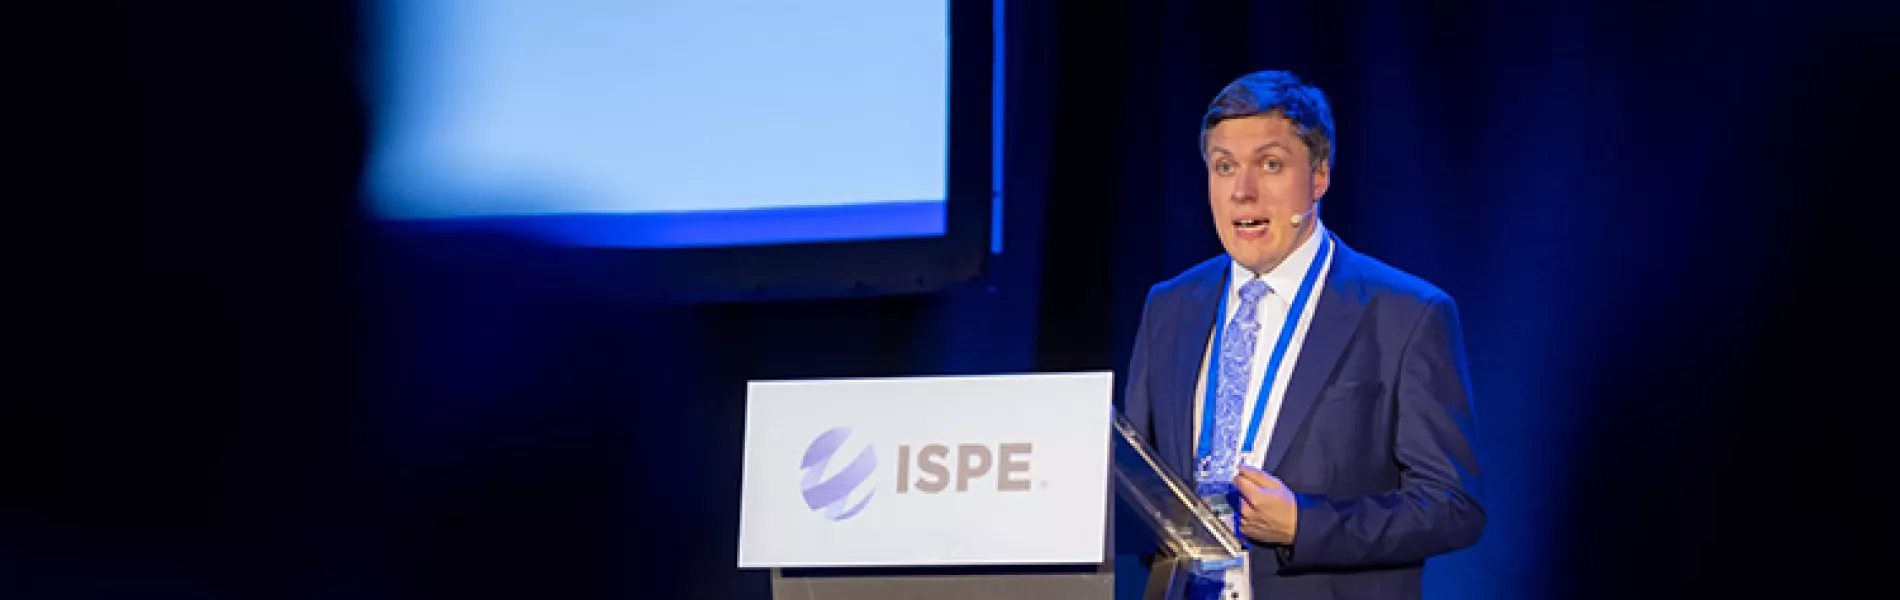 Opening the 2023 ISPE Europe Annual Conference on 8 May, Peter Twomey, Head of Inspections for the European Medicines Agency (EMA), offered a keynote address titled International Cooperation, Harmonization, and Reliance in GMP.